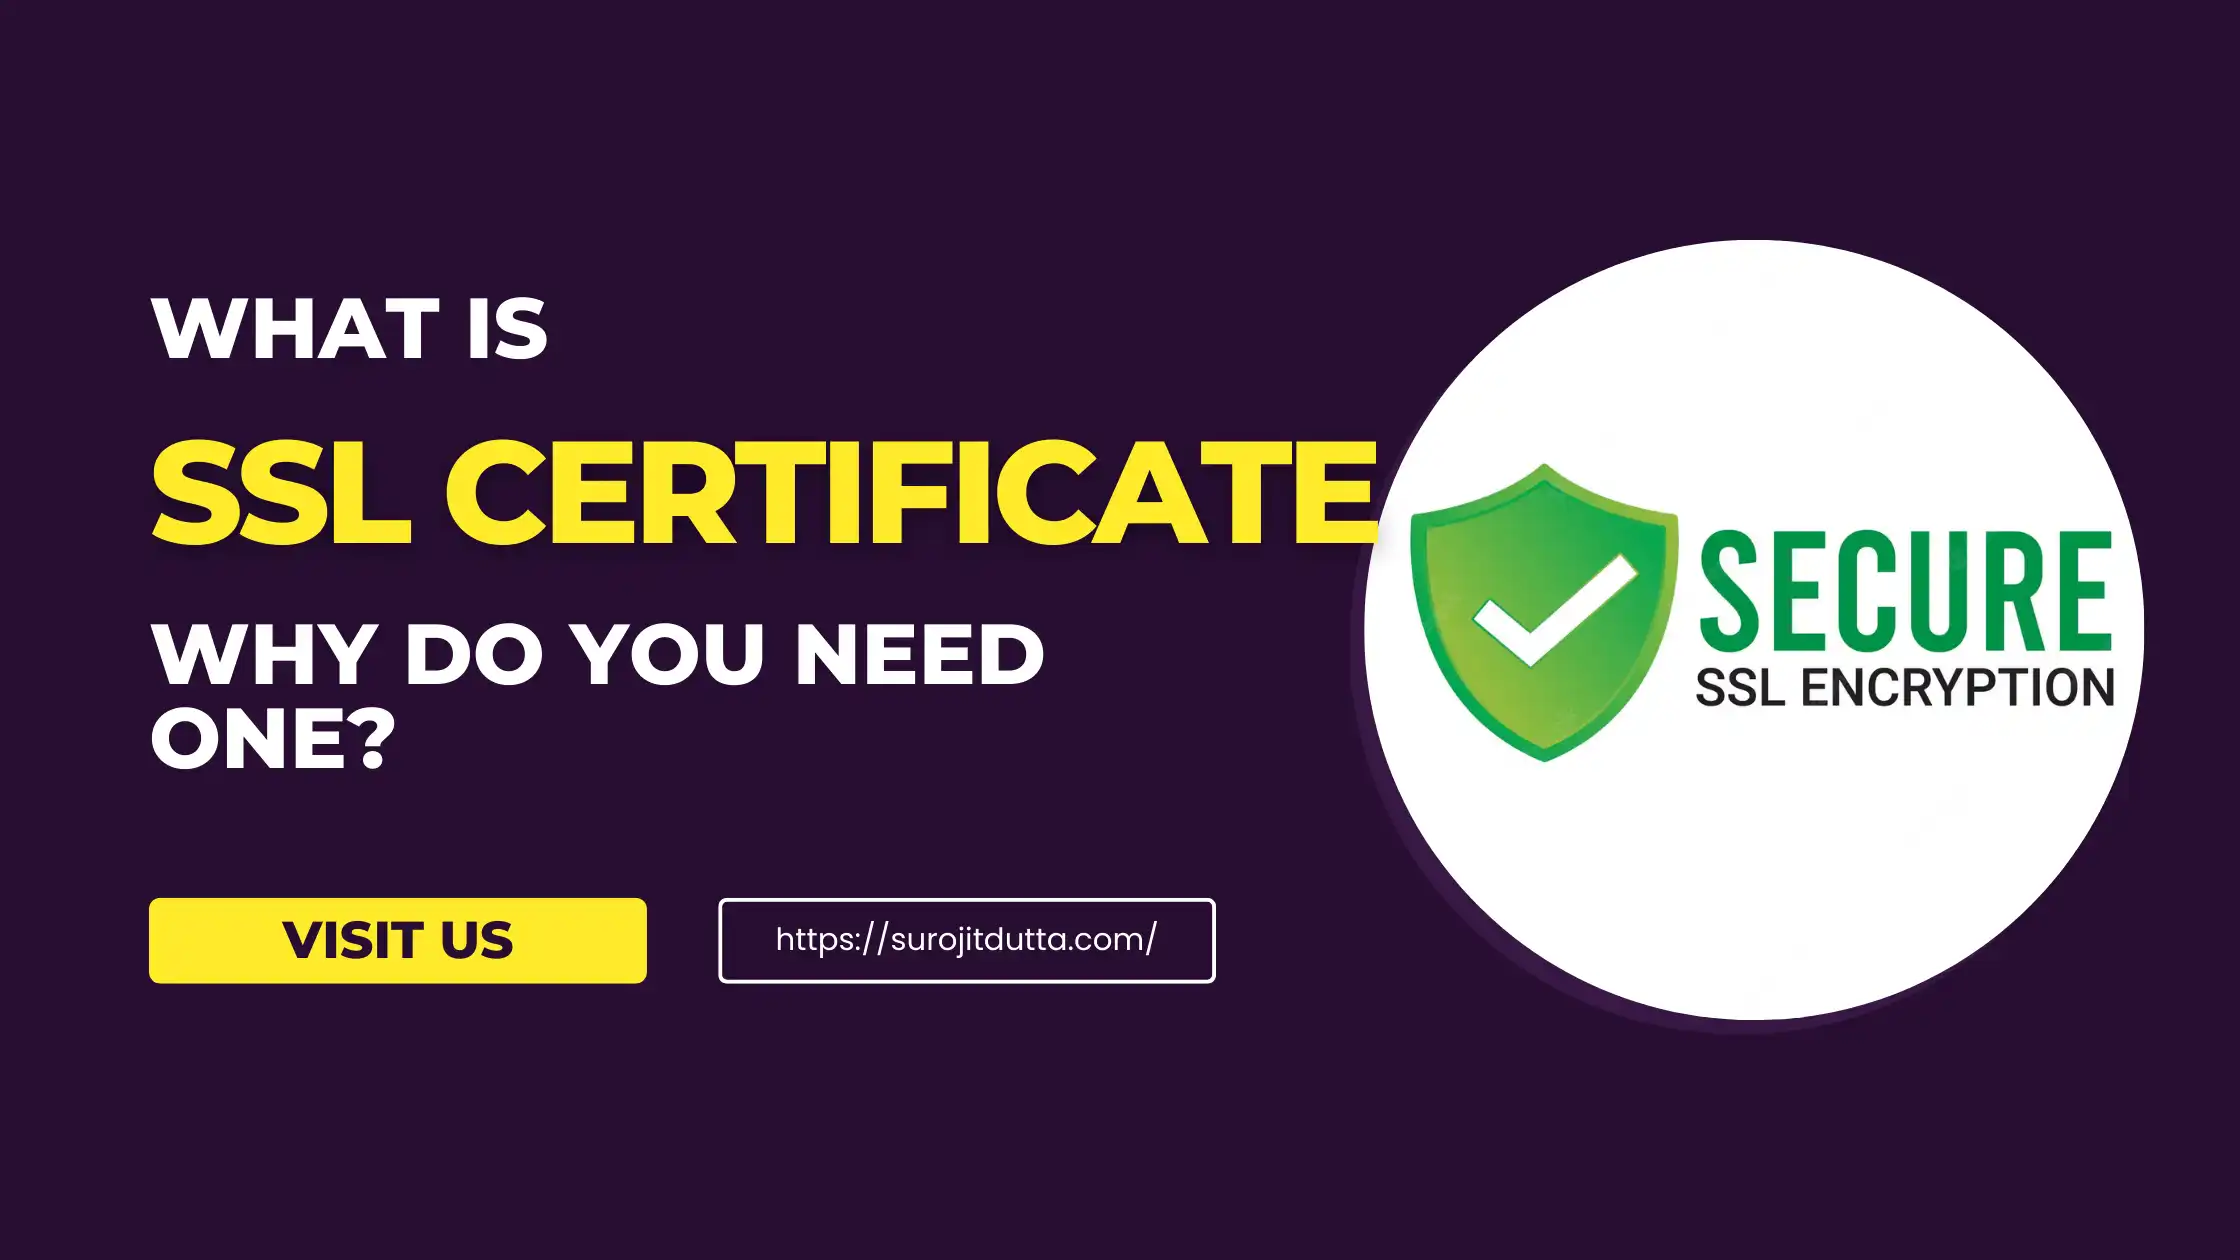 SSL Certificate: What Is It and Why Do you Need One